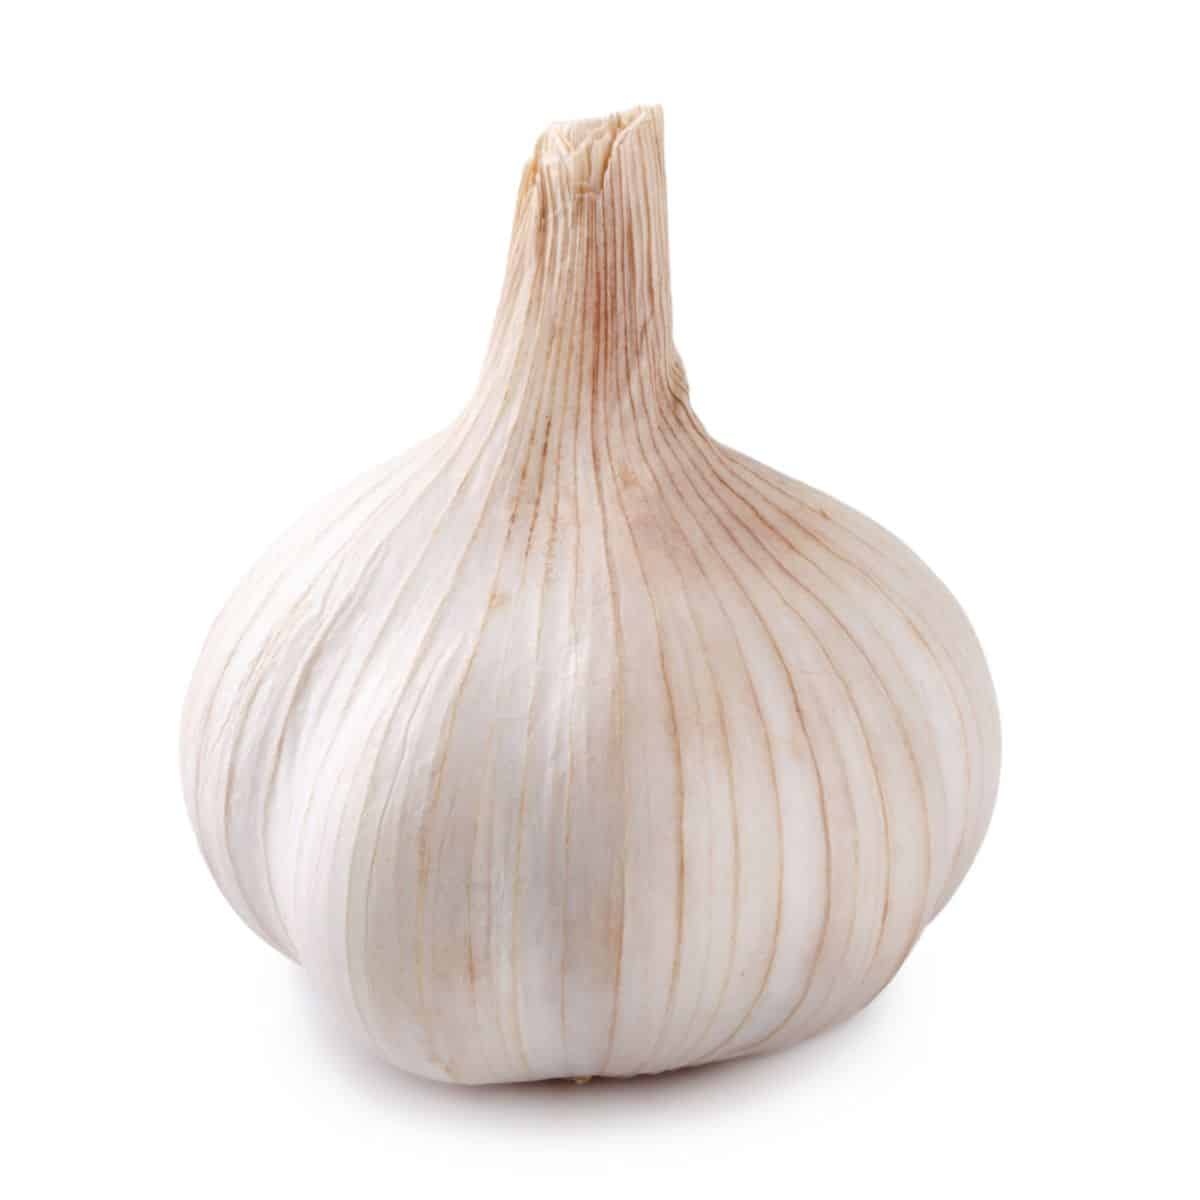 silverskin garlic on an isolated white background.